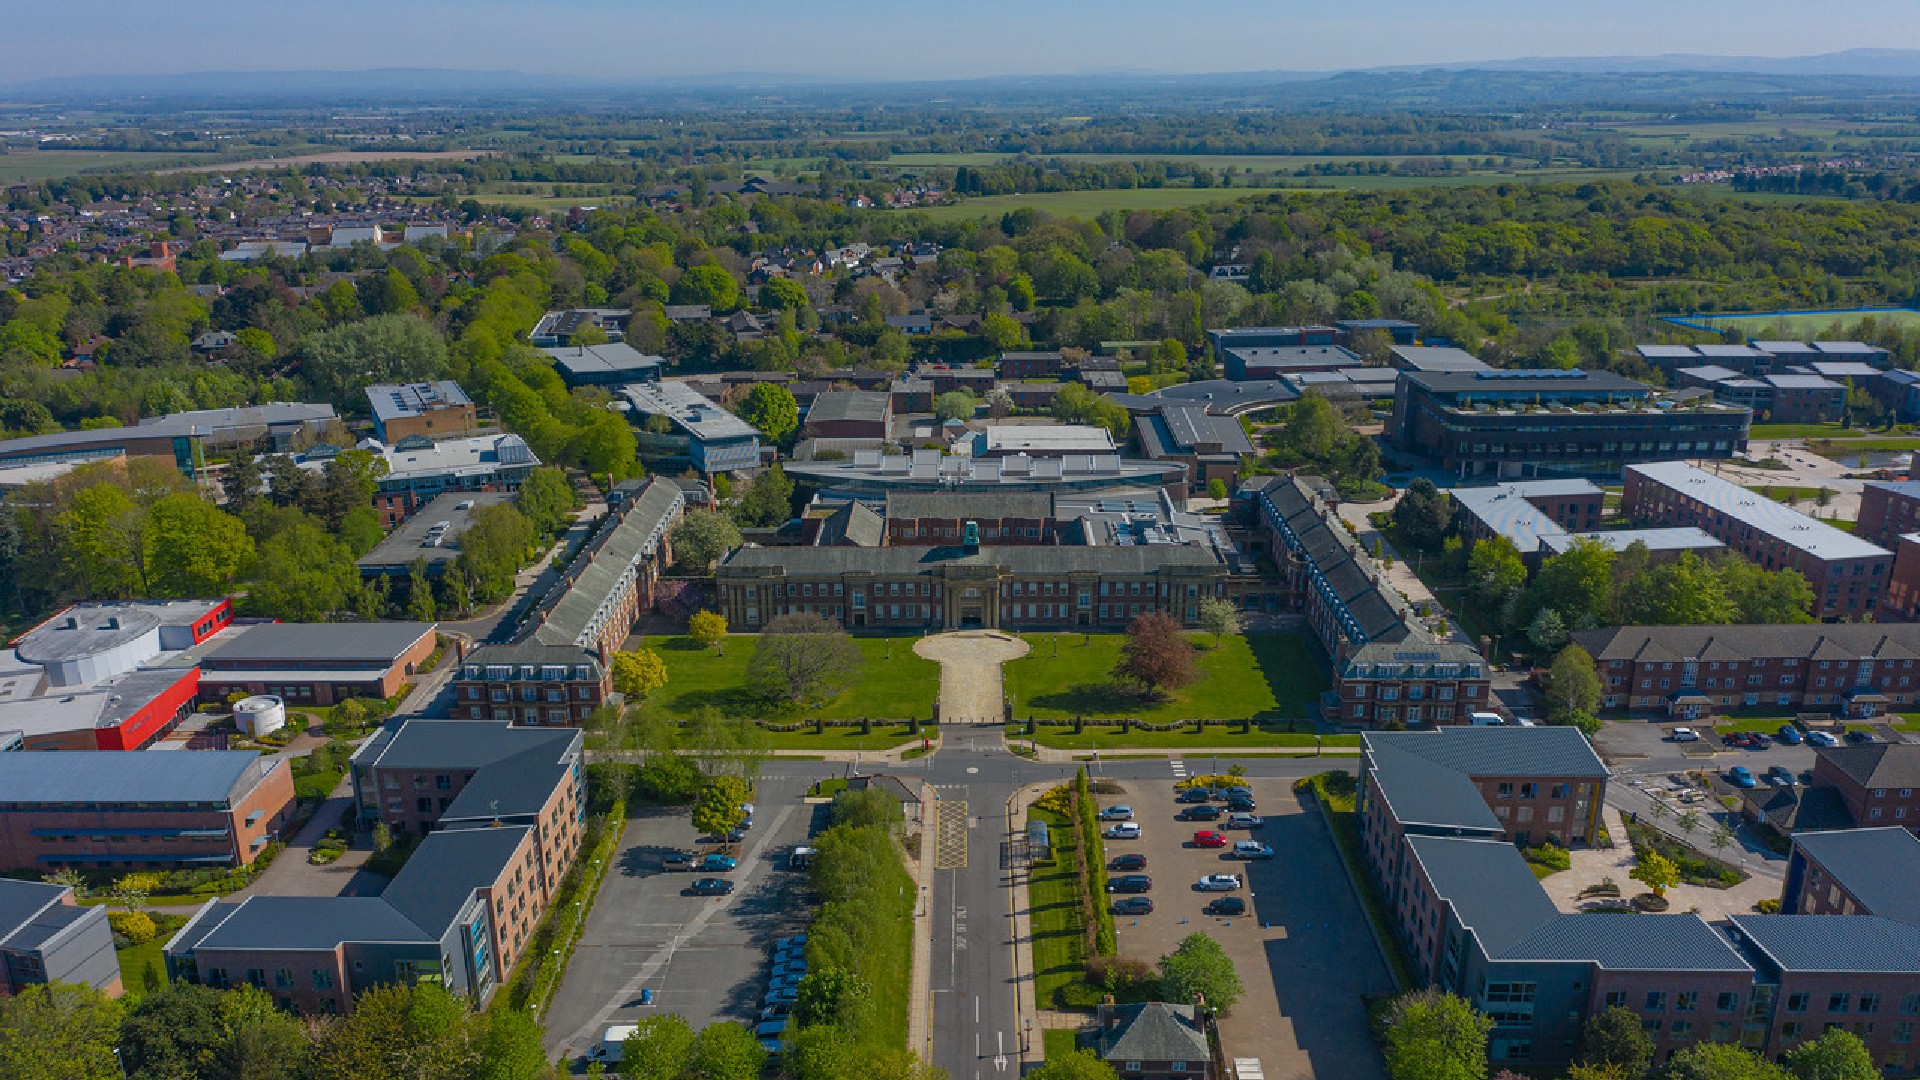 An image of an aerial view of the front of Edge Hill Universities campus.